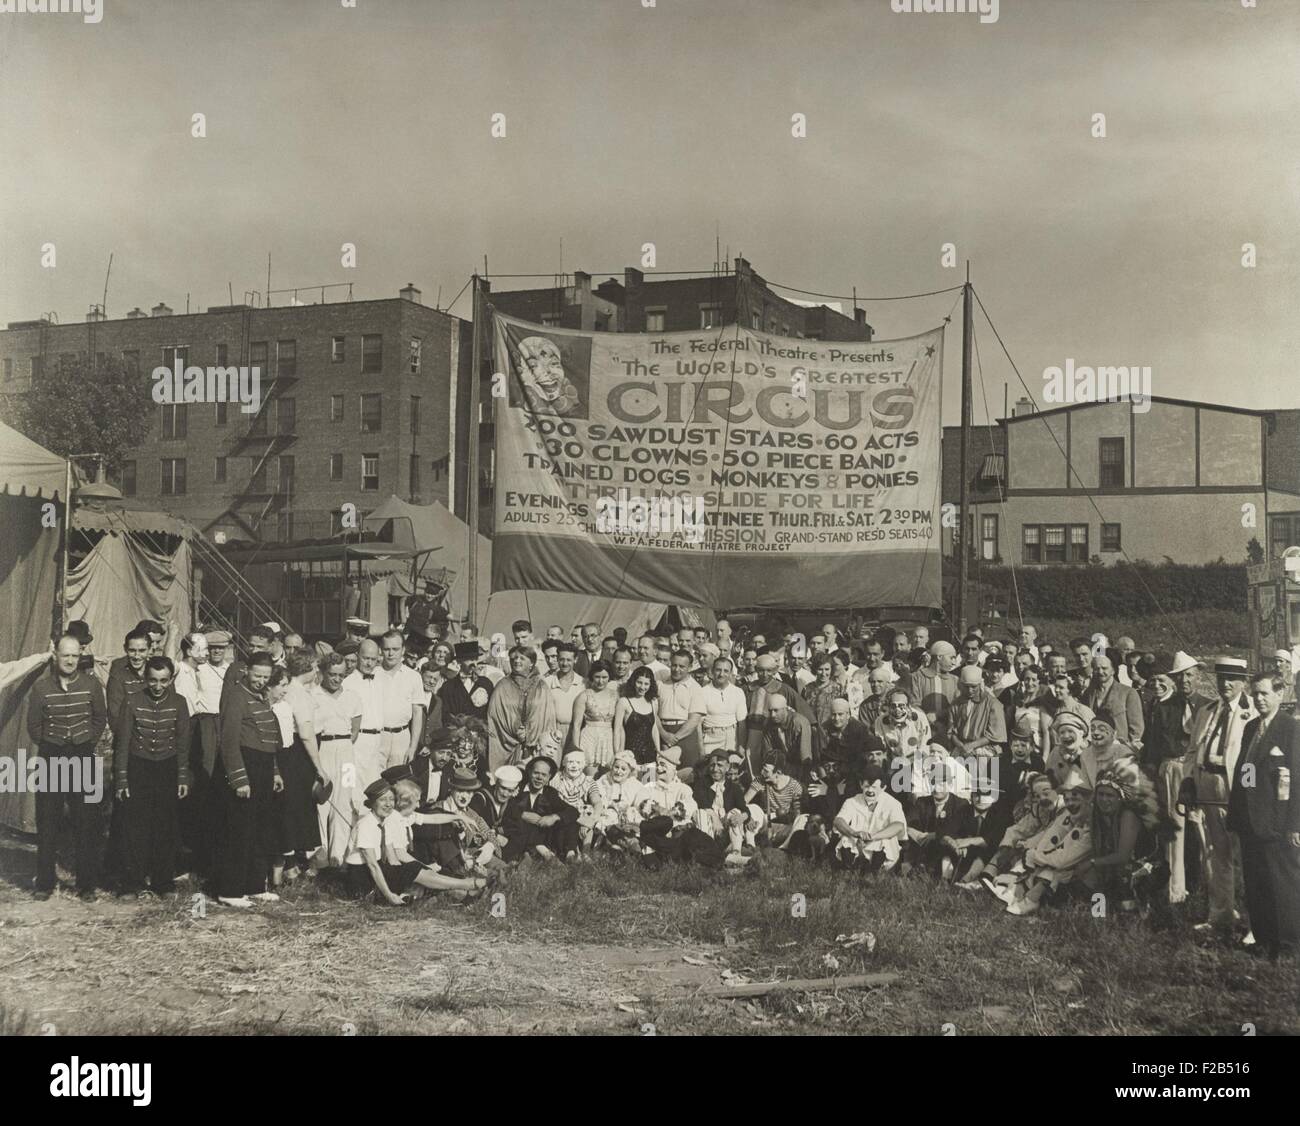 The Federal Theatre presents the world's greatest! The WPA's Federal Theater Project supported this circus with 200 sawdust stars, 60 acts, 30 clowns, a 50 piece band, trained dogs, monkeys and ponies. Ca. 1935-39. - (BSLOC 2015 1 159) Stock Photo